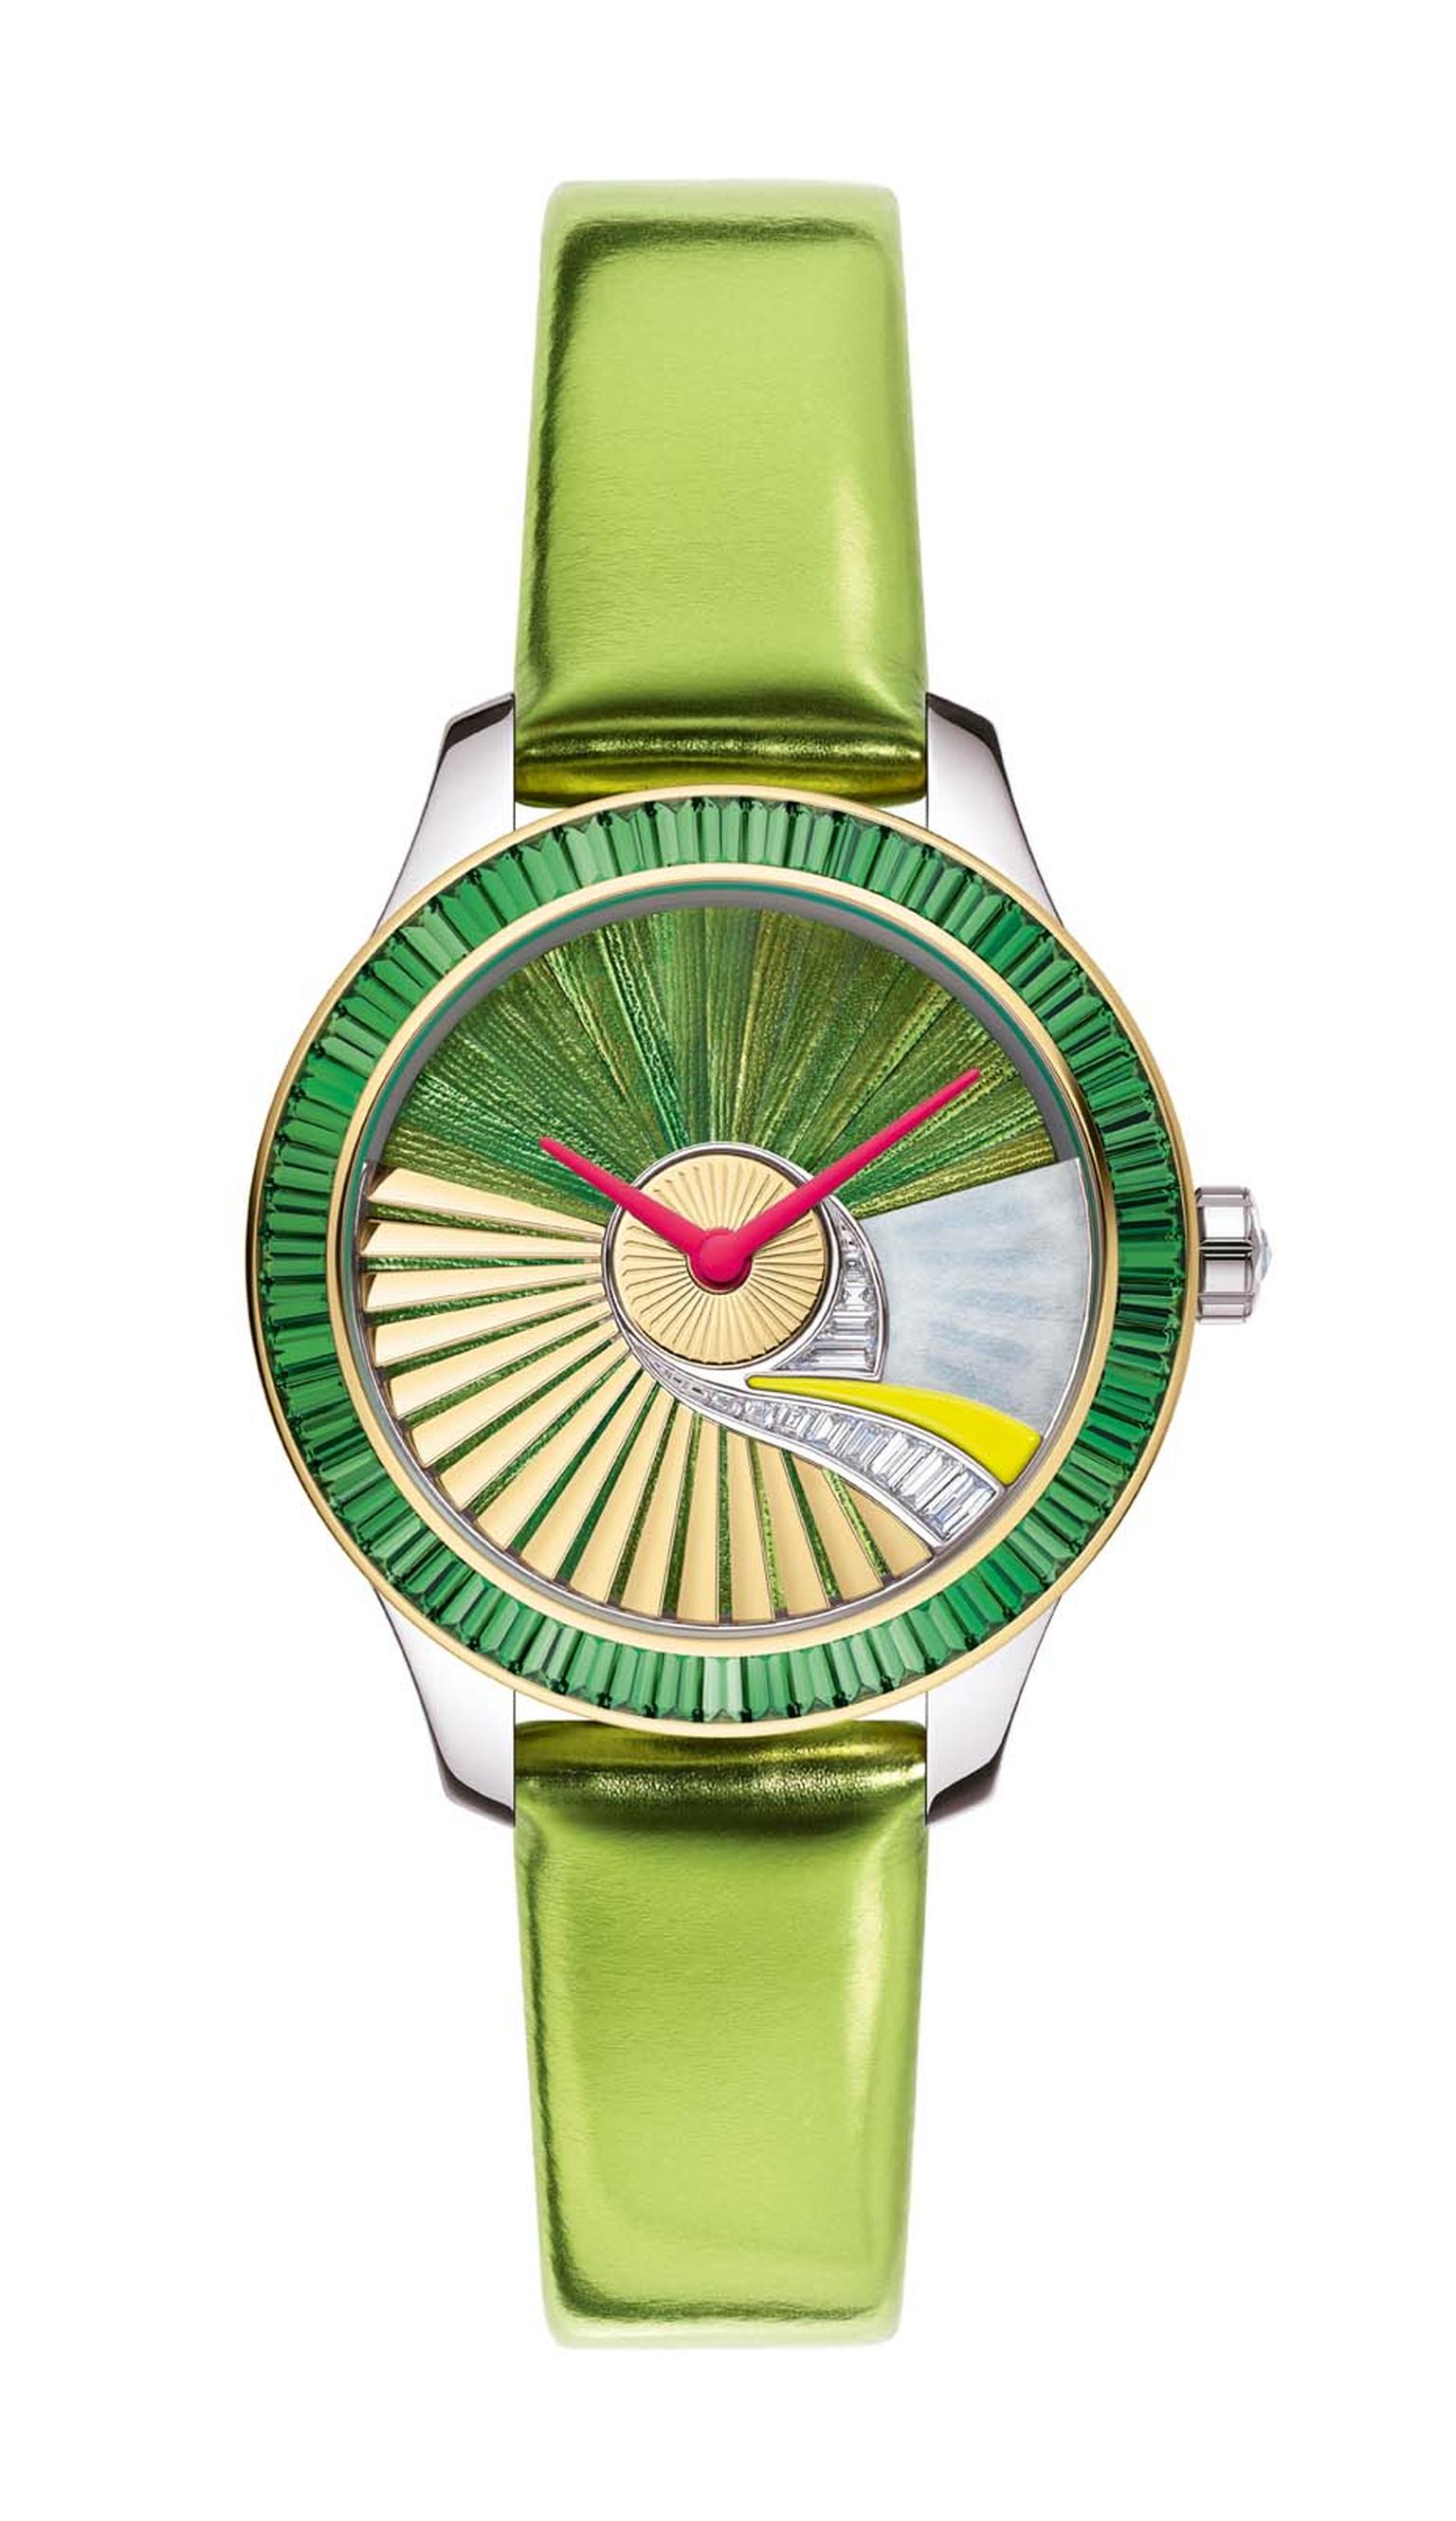 Dior VIII Grand Bal Pièce Unique Envol no. 5 watch glows with a natural green iridescence thanks to the use of scarab beetle wings set into the dial using marquetry. All the Dior VIII Grand Bal family have the oscillating weight - or rotor - of the moveme